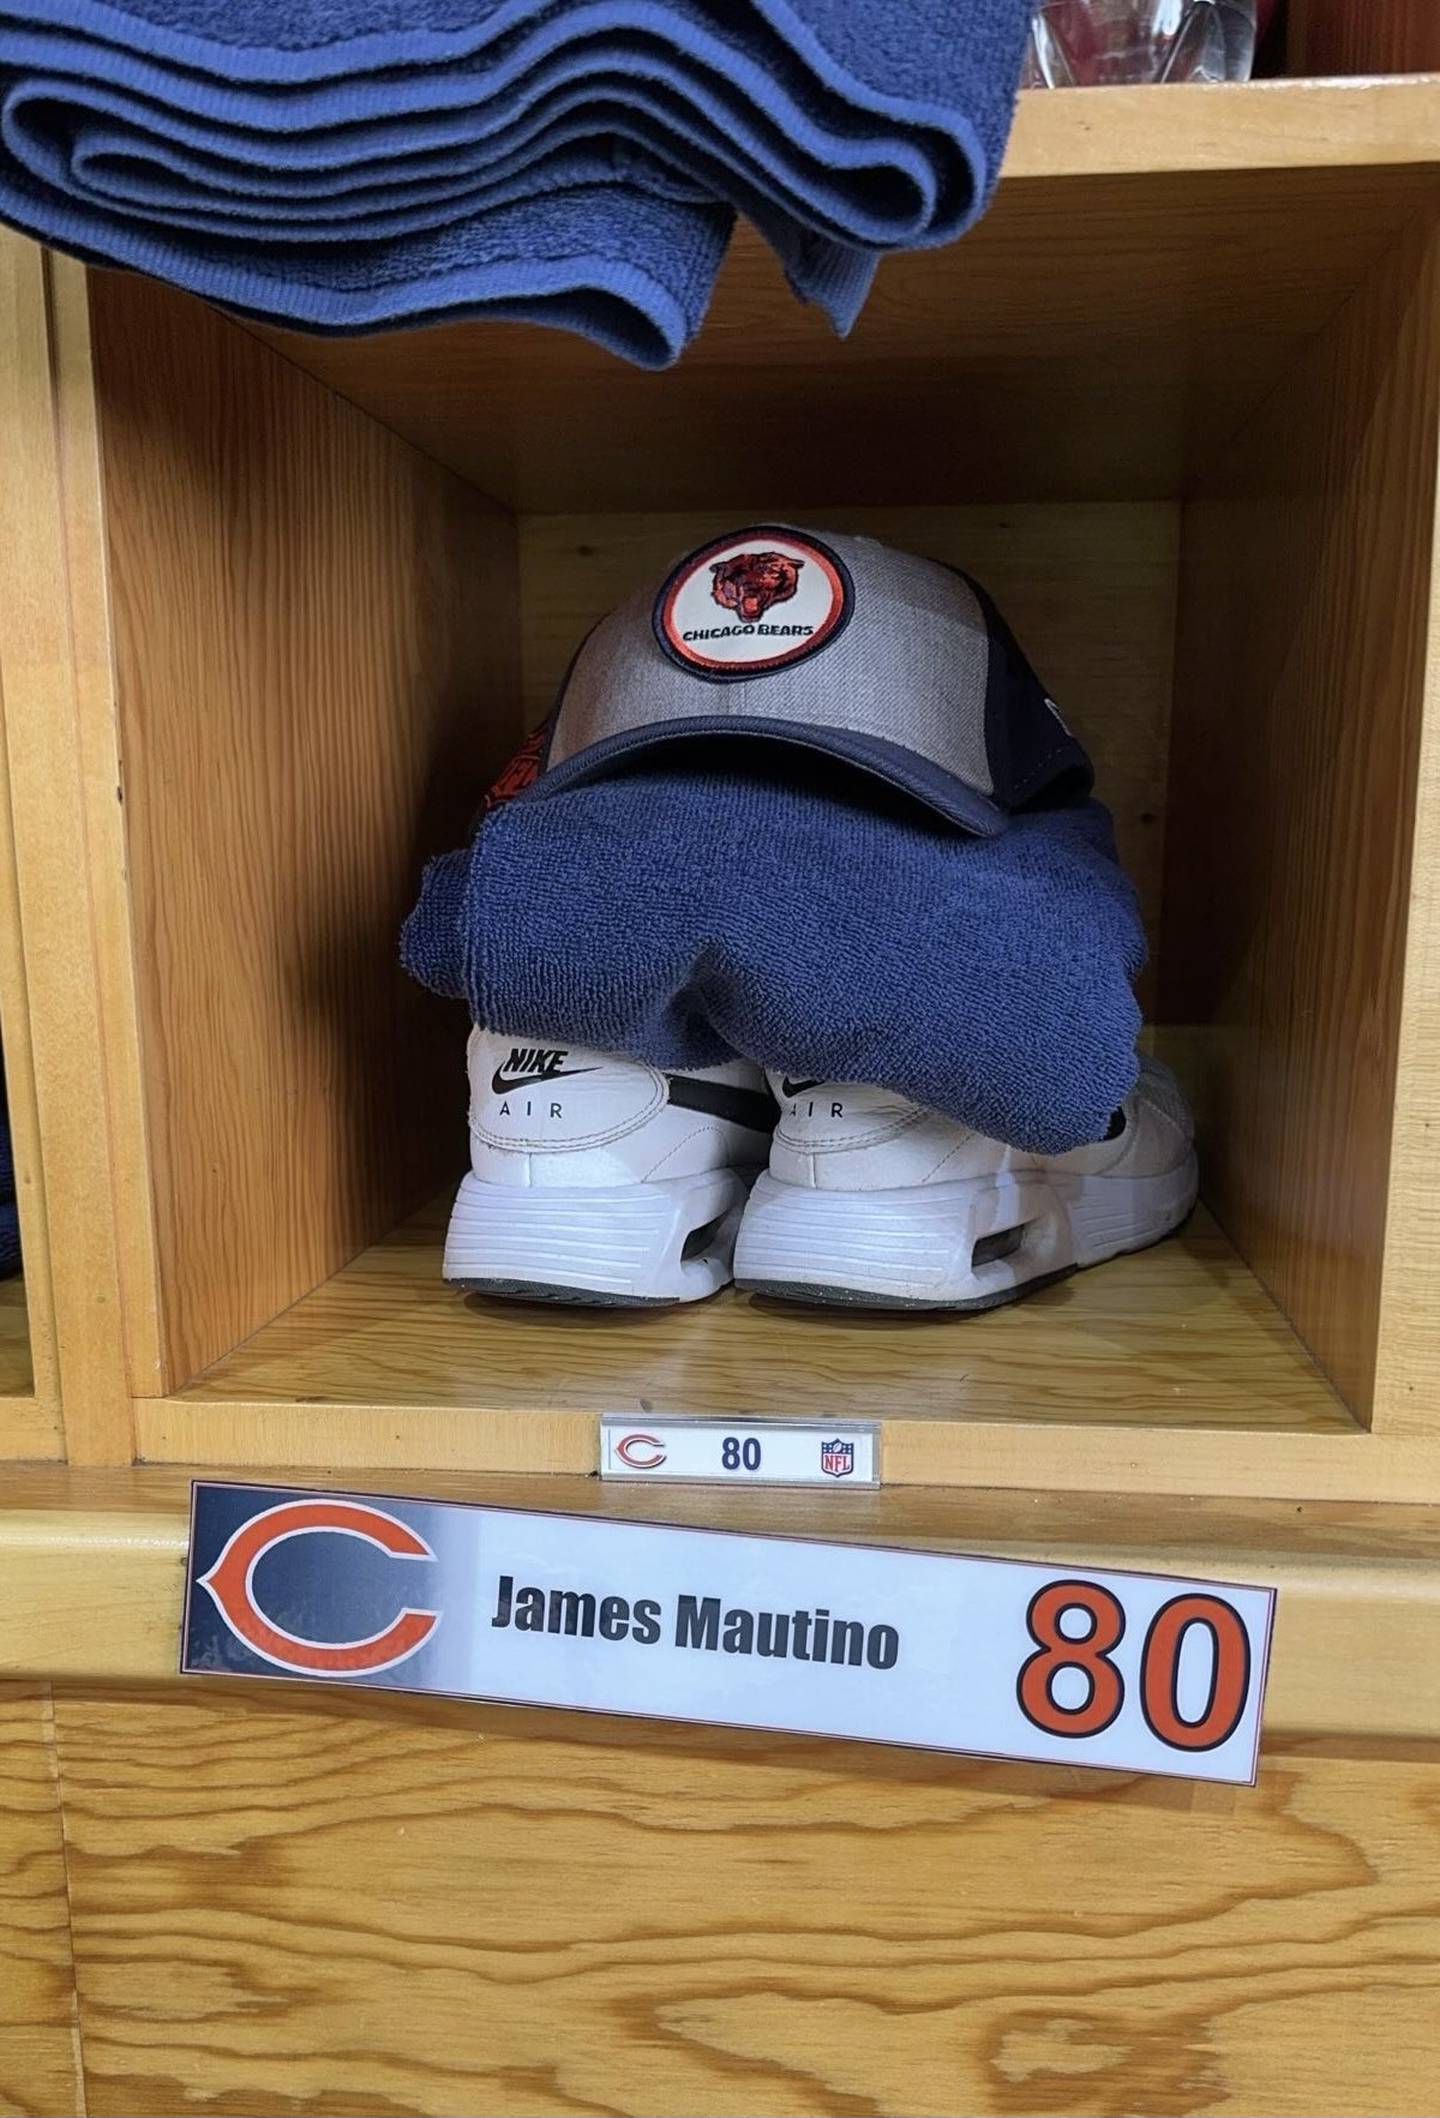 Spring Valley's James Mautino, a 2019 Hall High School grad, had his own cubicle and name plate with his No. 80 when he attended the Chicago Bears' "Pro Day" at Halas Hall on Tuesday. He is hopeful to play professionally.